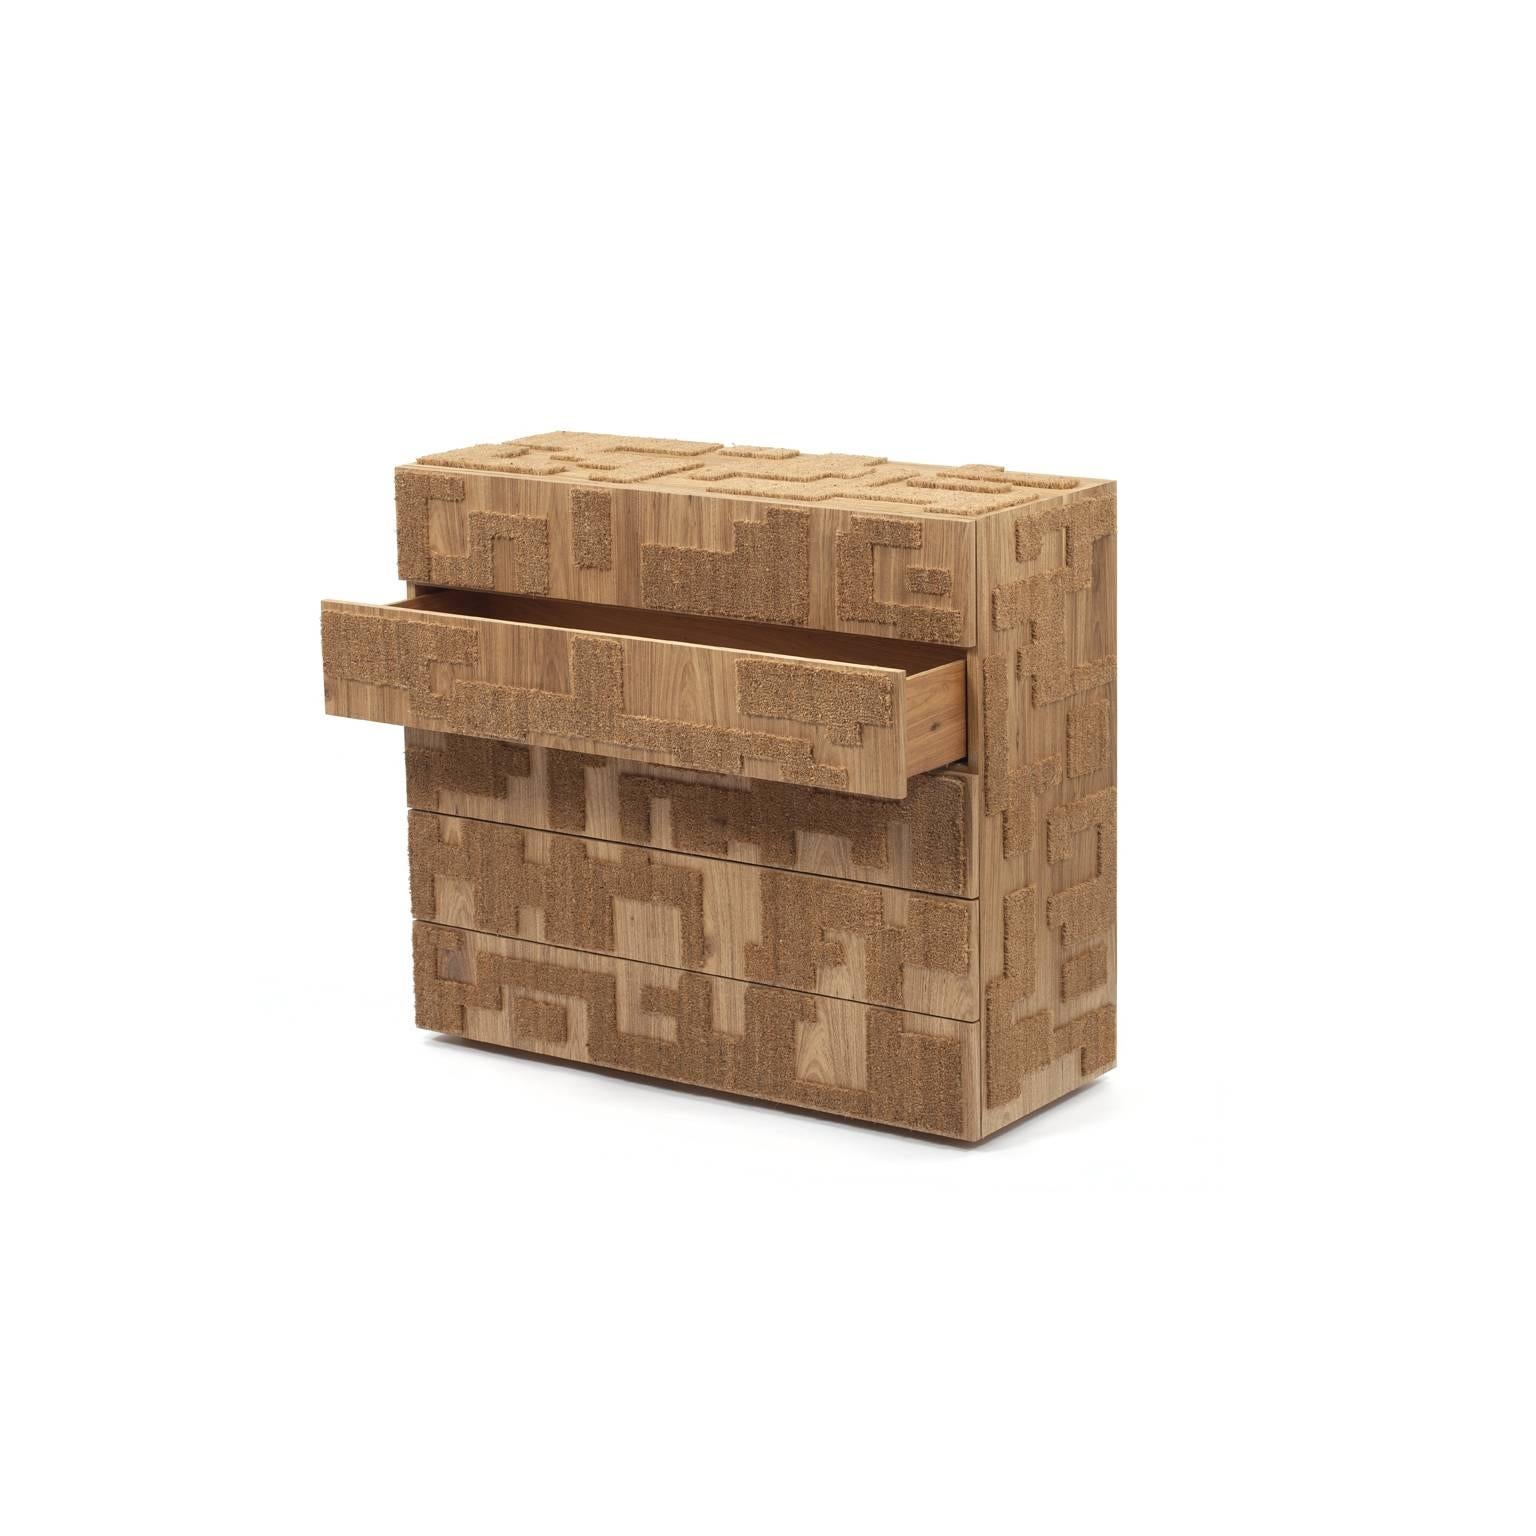 Capacho Contemporary Chest of Drawers by Fernando and Humberto Campana (Holz) im Angebot